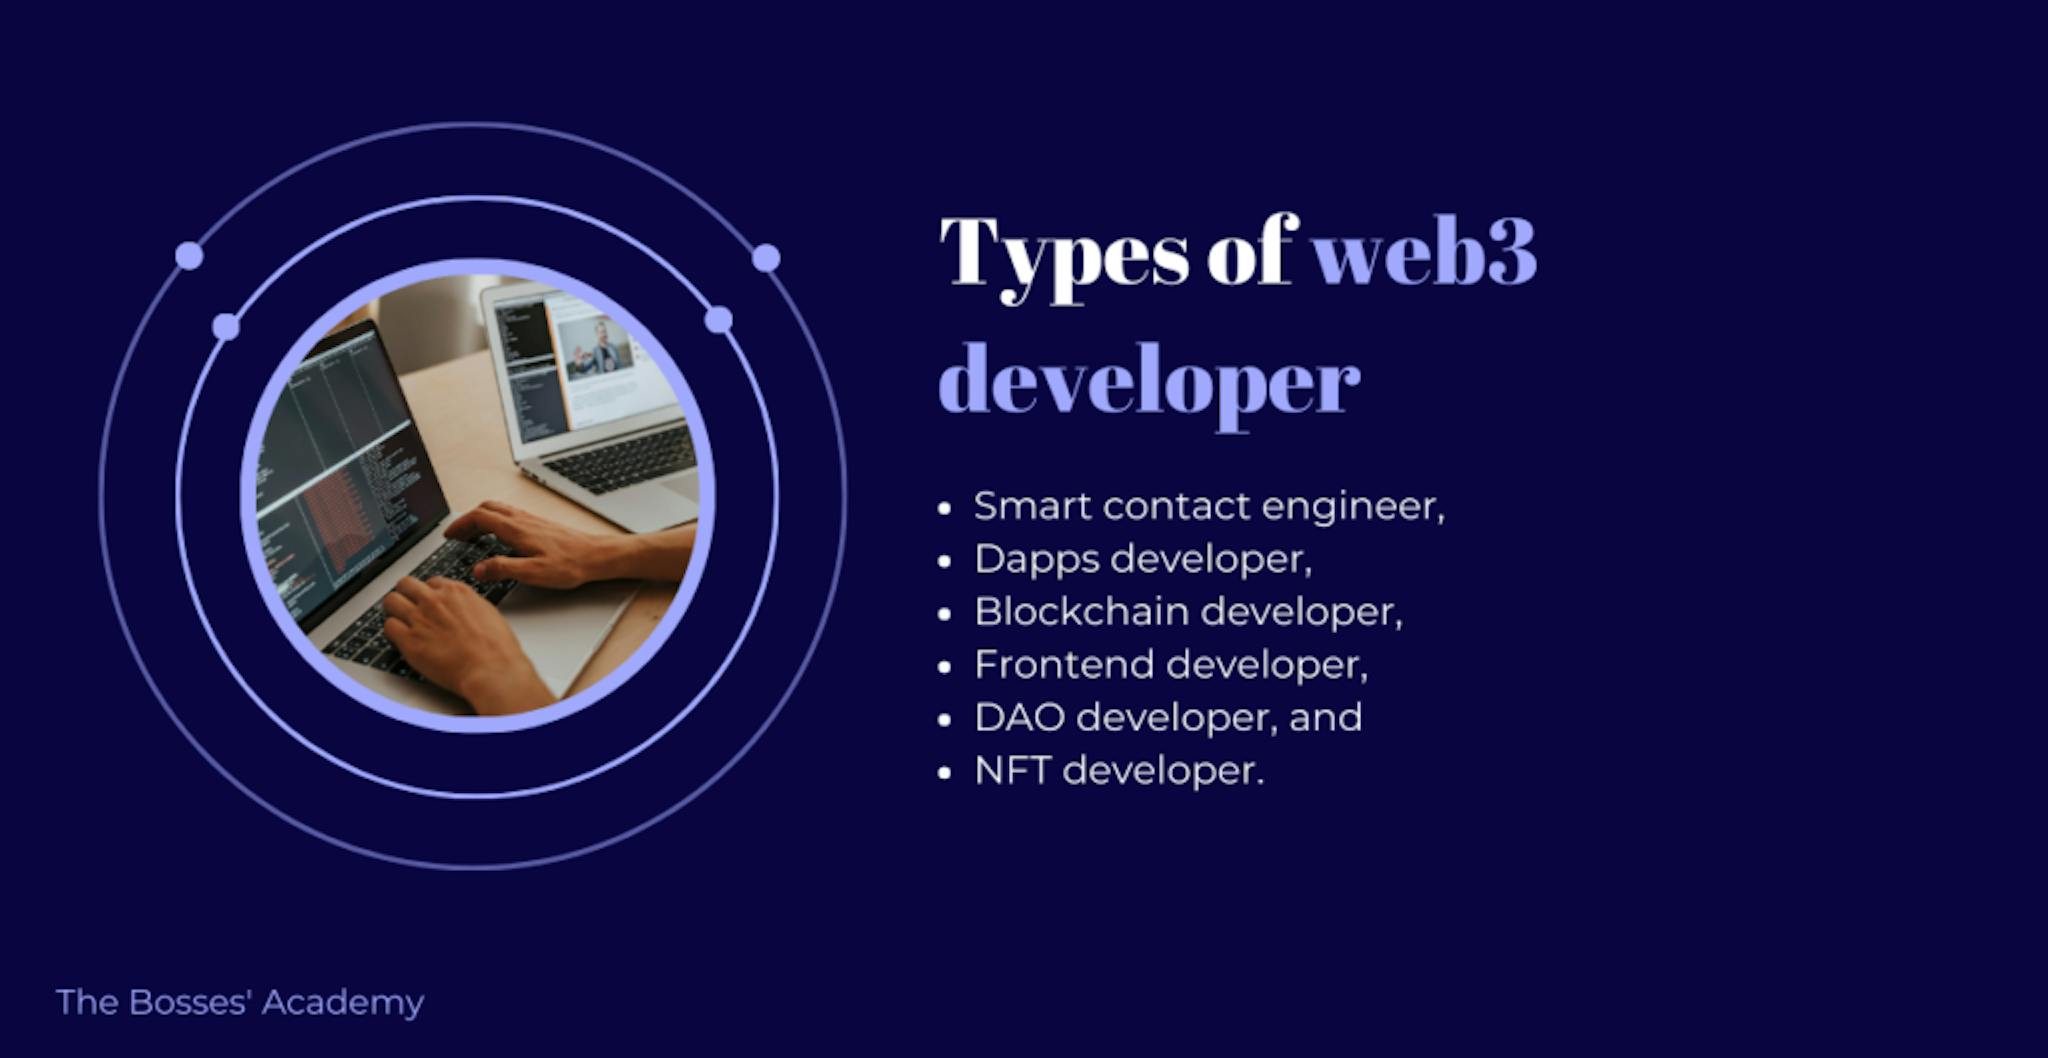 The different web3 developers